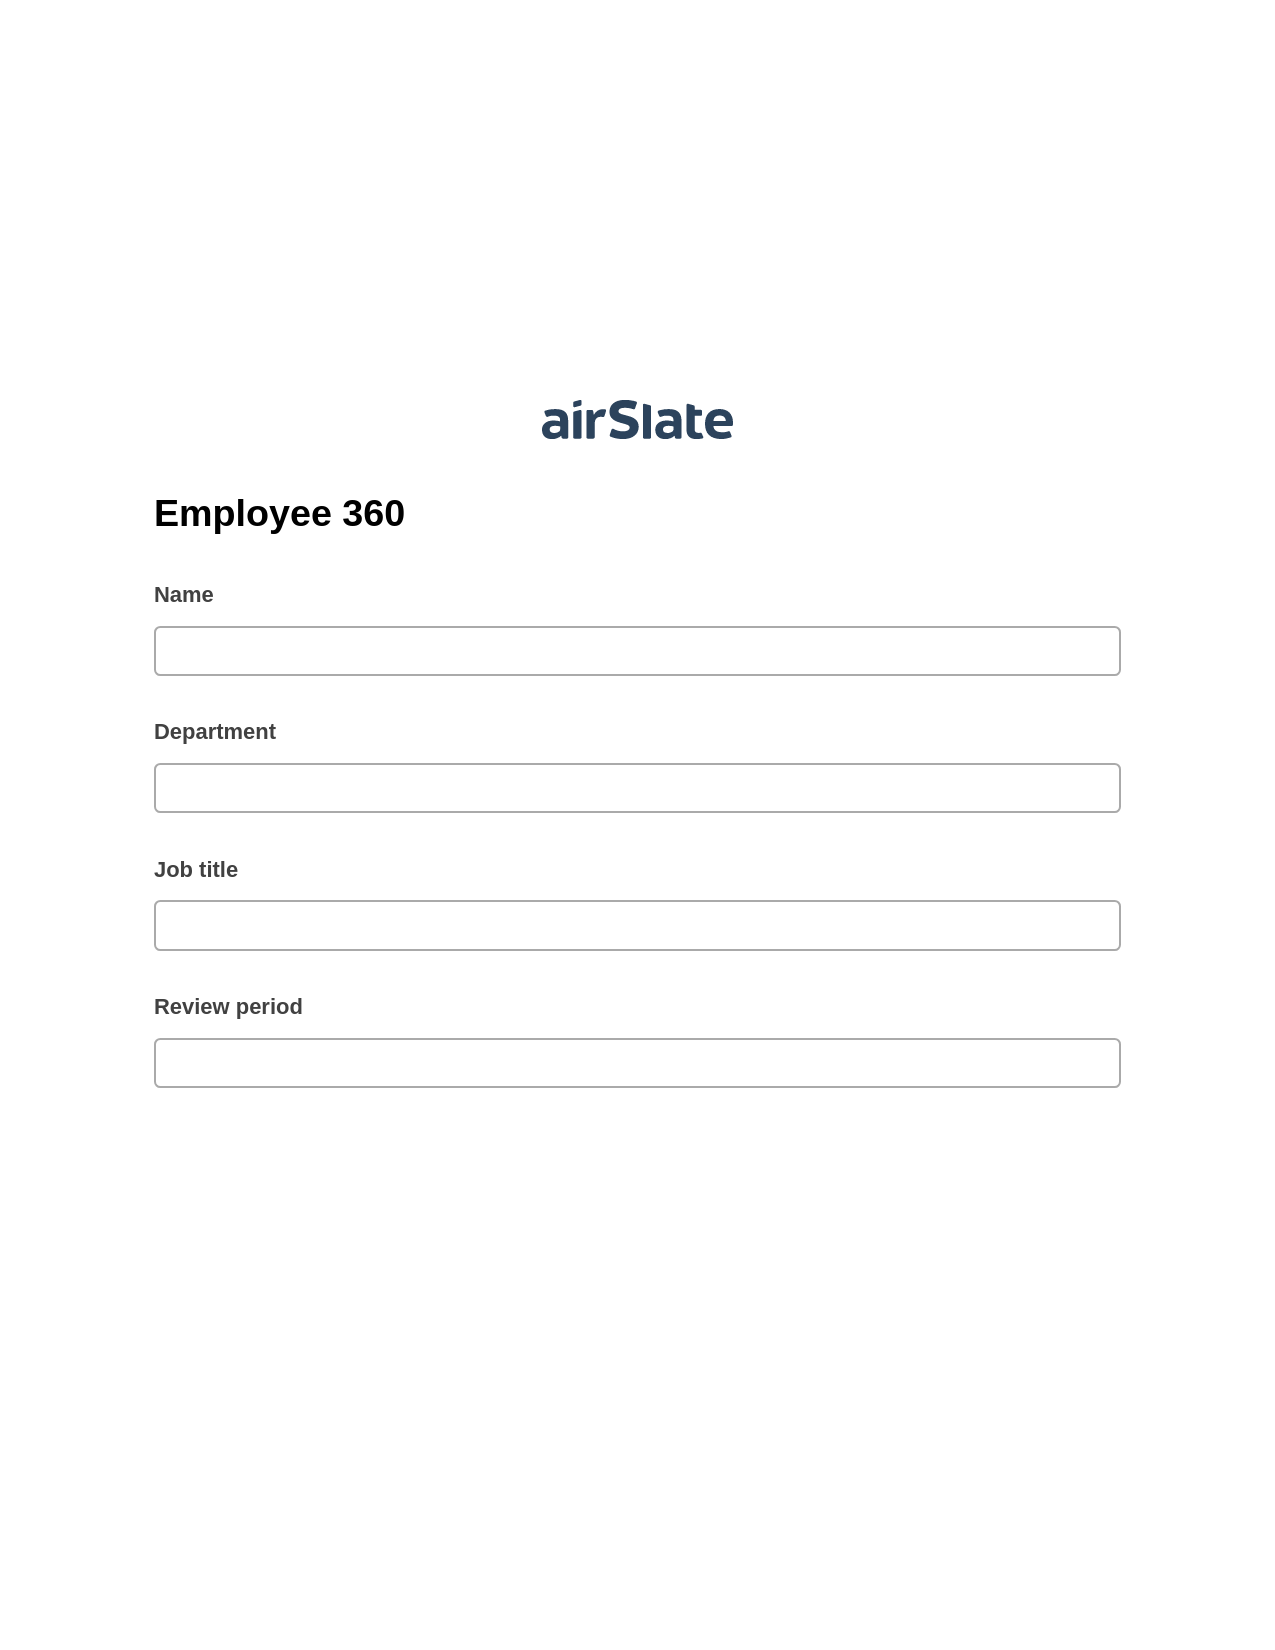 Employee 360 Pre-fill from AirTable Bot, Update MS Dynamics 365 Record Bot, Archive to SharePoint Folder Bot